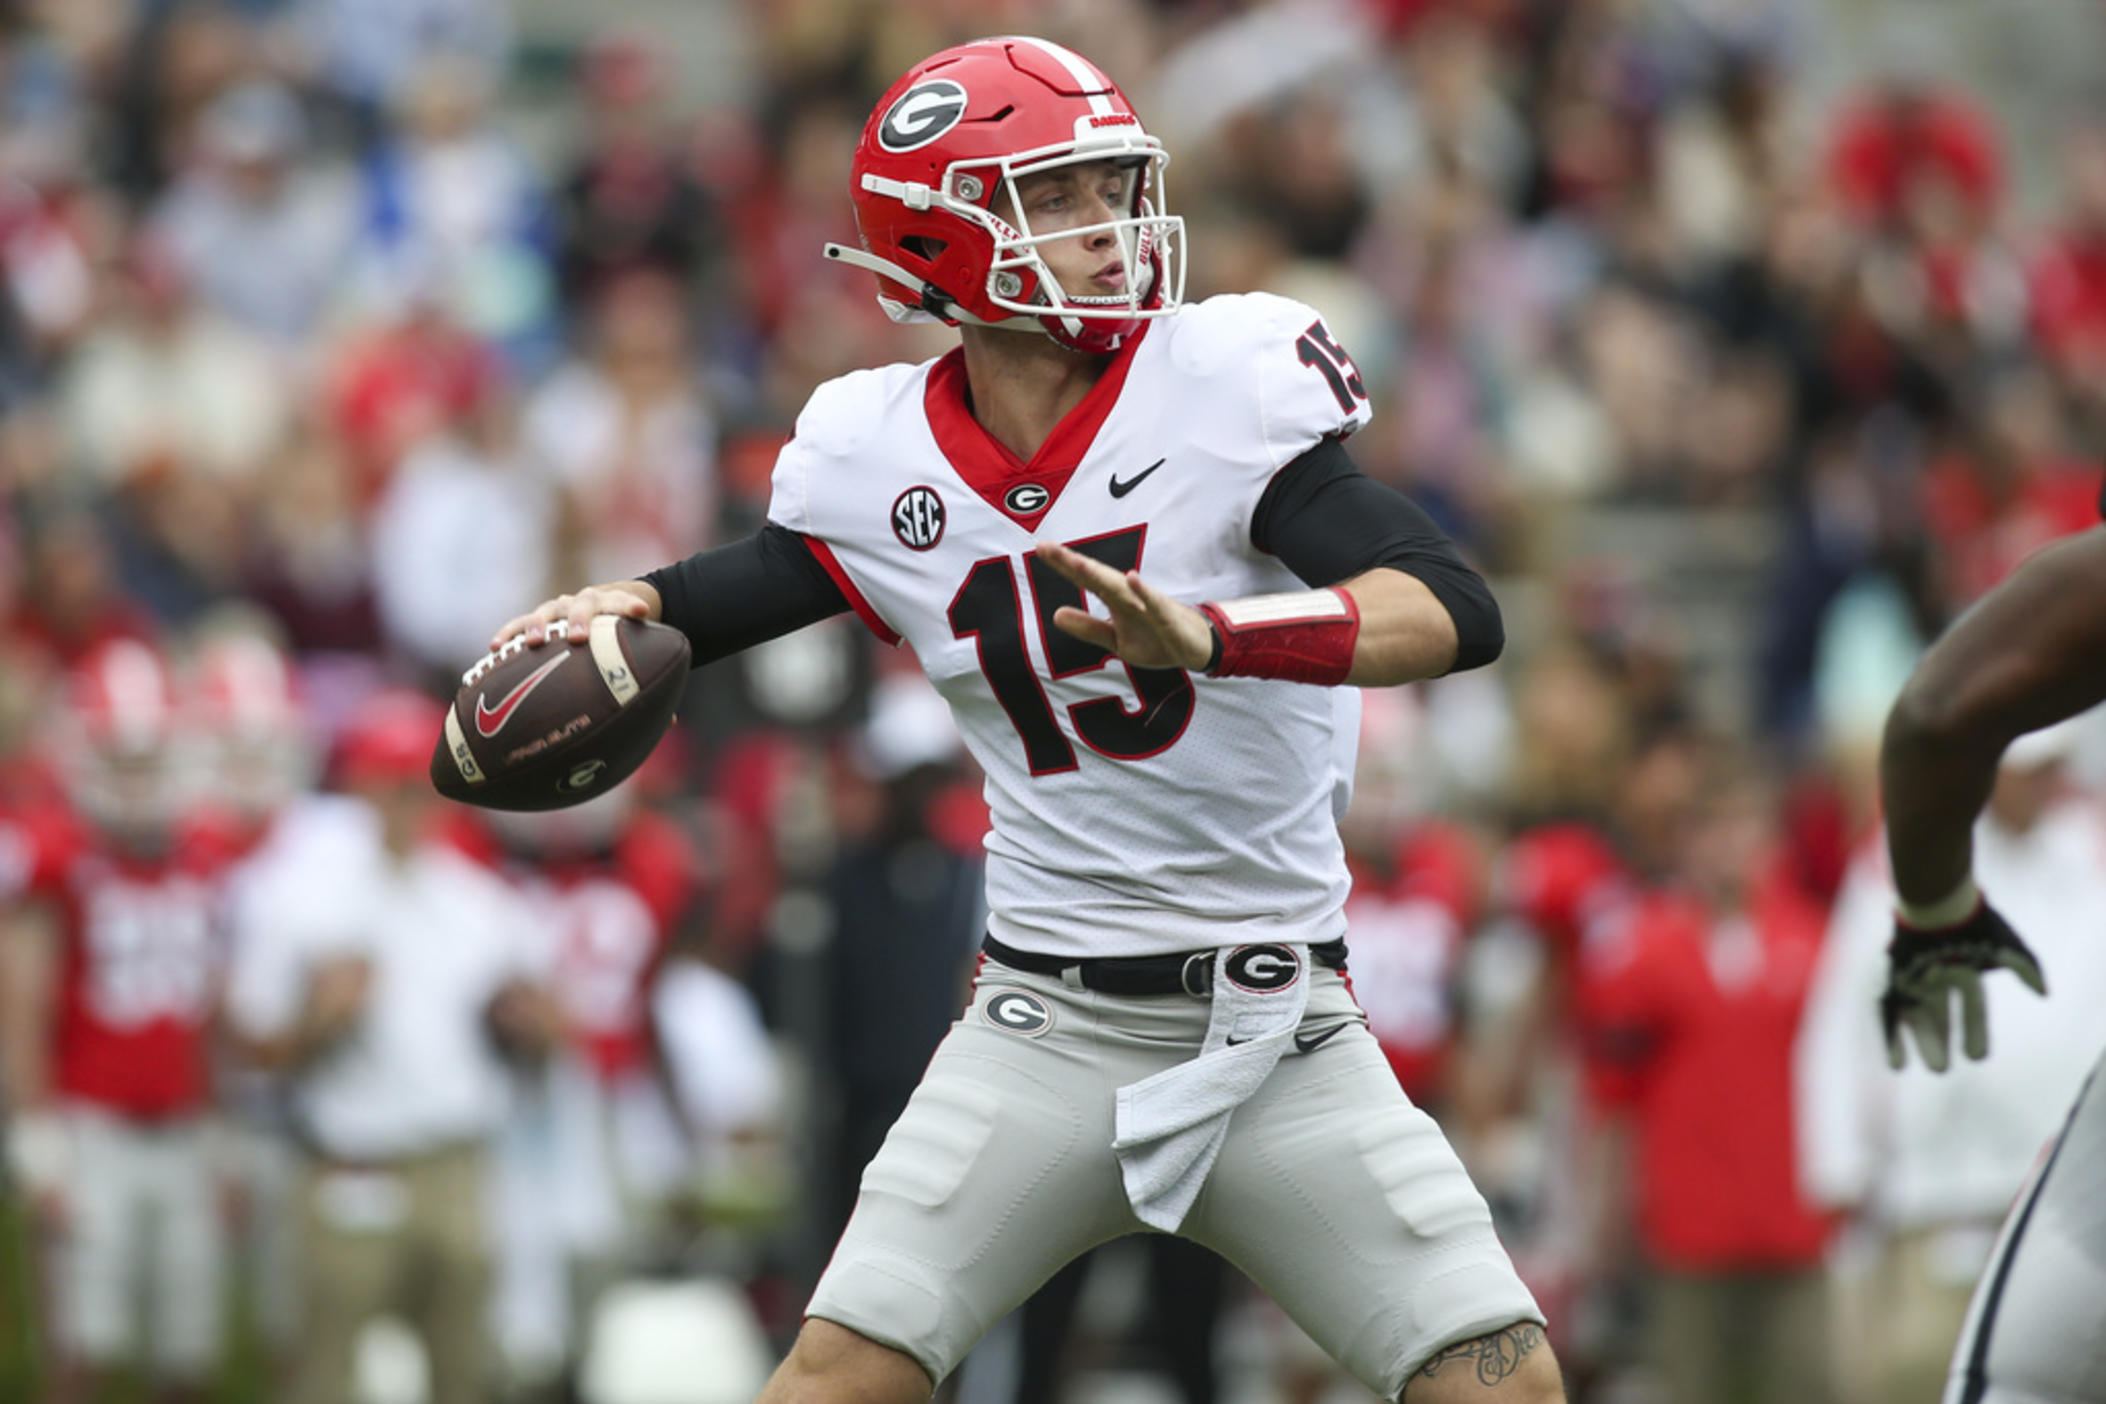 Georgia quarterback Carson Beck (15) throws in the first half of Georgia's spring NCAA college football game, Saturday, April 16, 2022, in Athens, Ga. Coach Kirby Smart has made it clear that Carson Beck is the quarterback to beat.